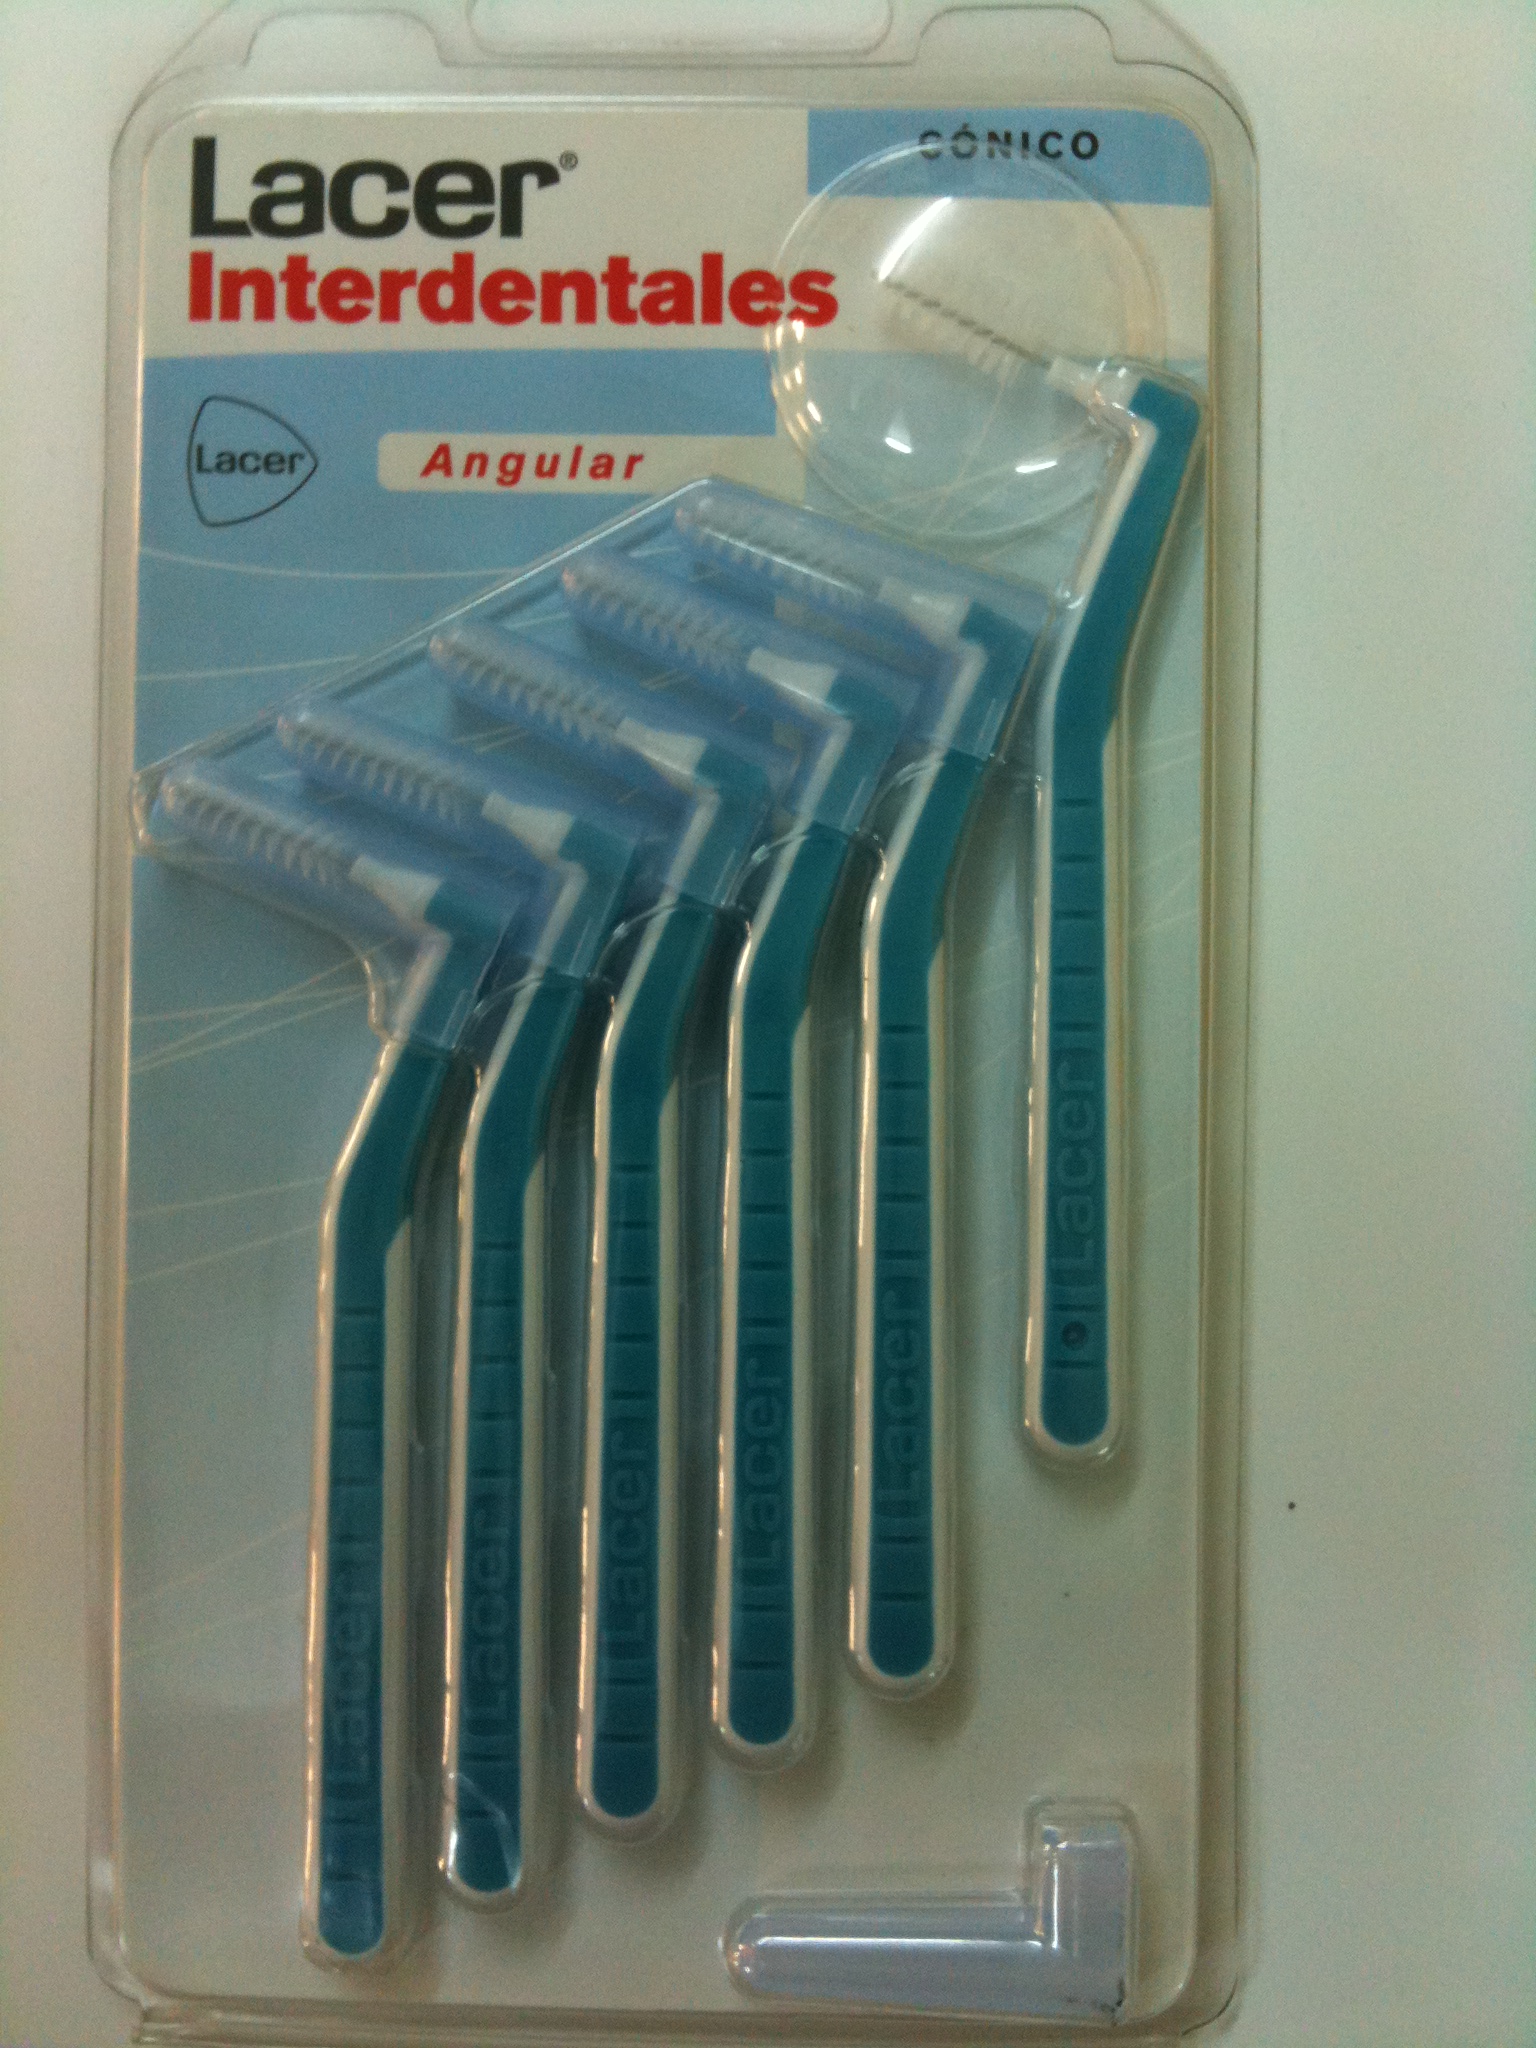 LACER INTERDENTAL CONIC 90º BOX WITH 6 UNITS